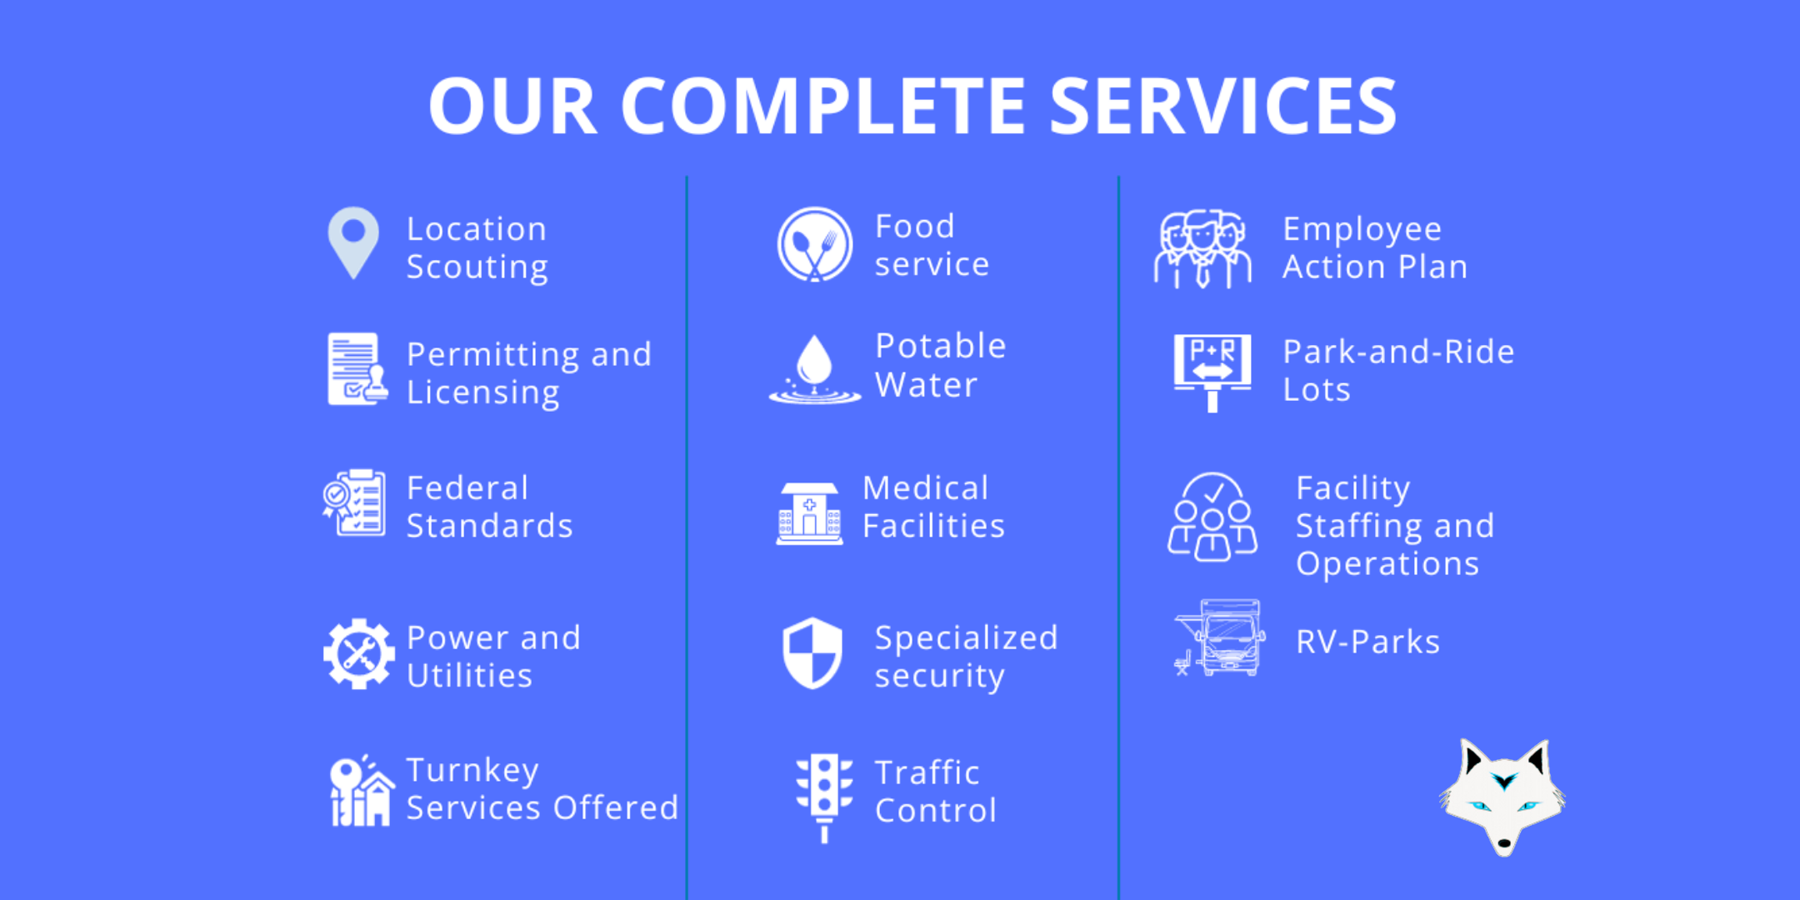 COMPLETE SERVICES